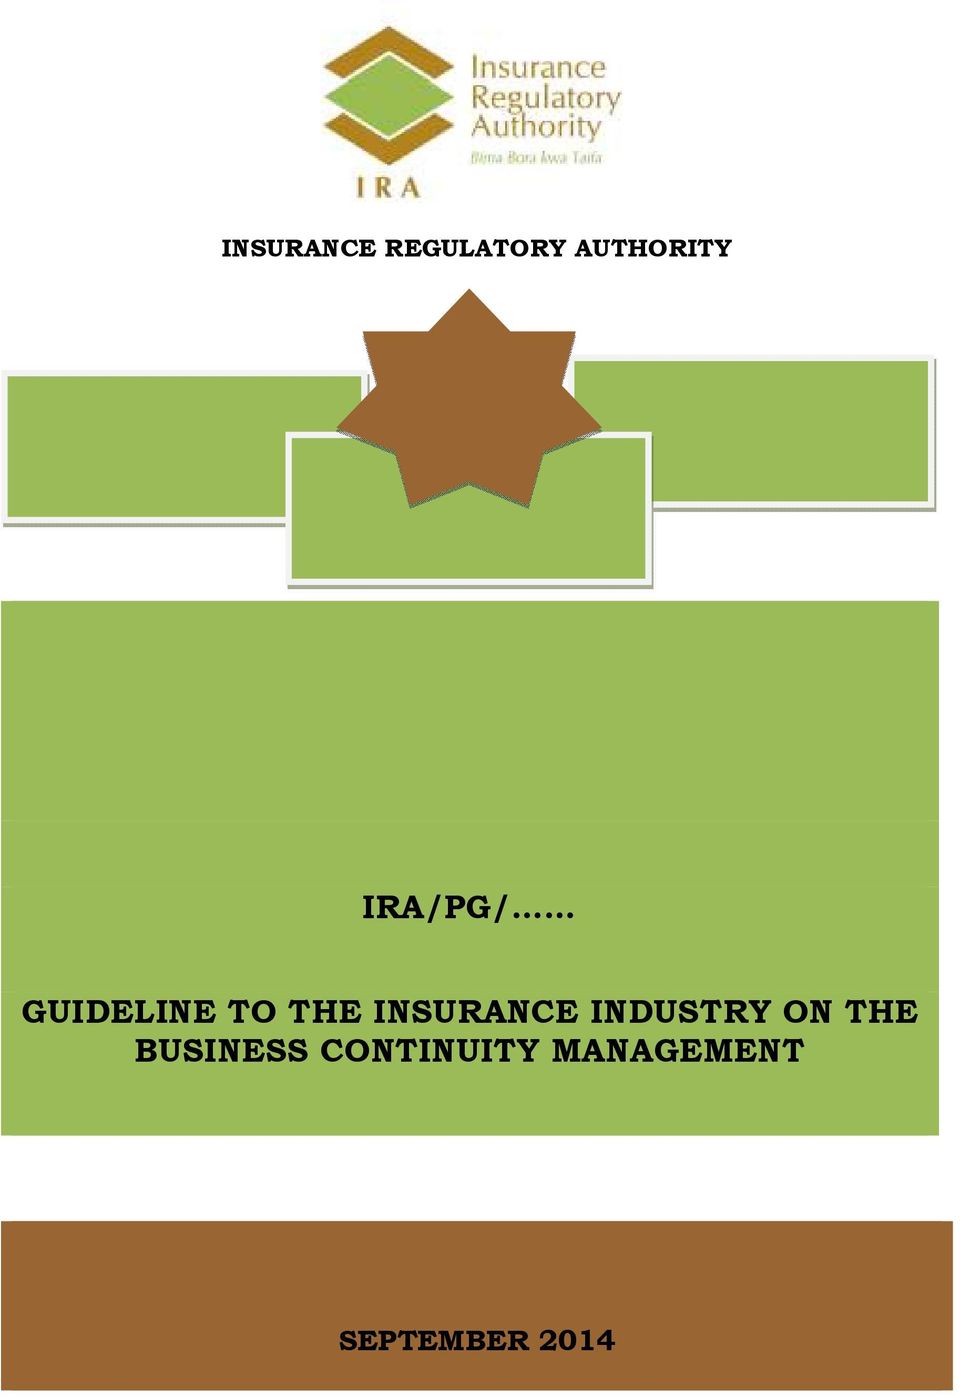 INSURANCE INDUSTRY ON THE